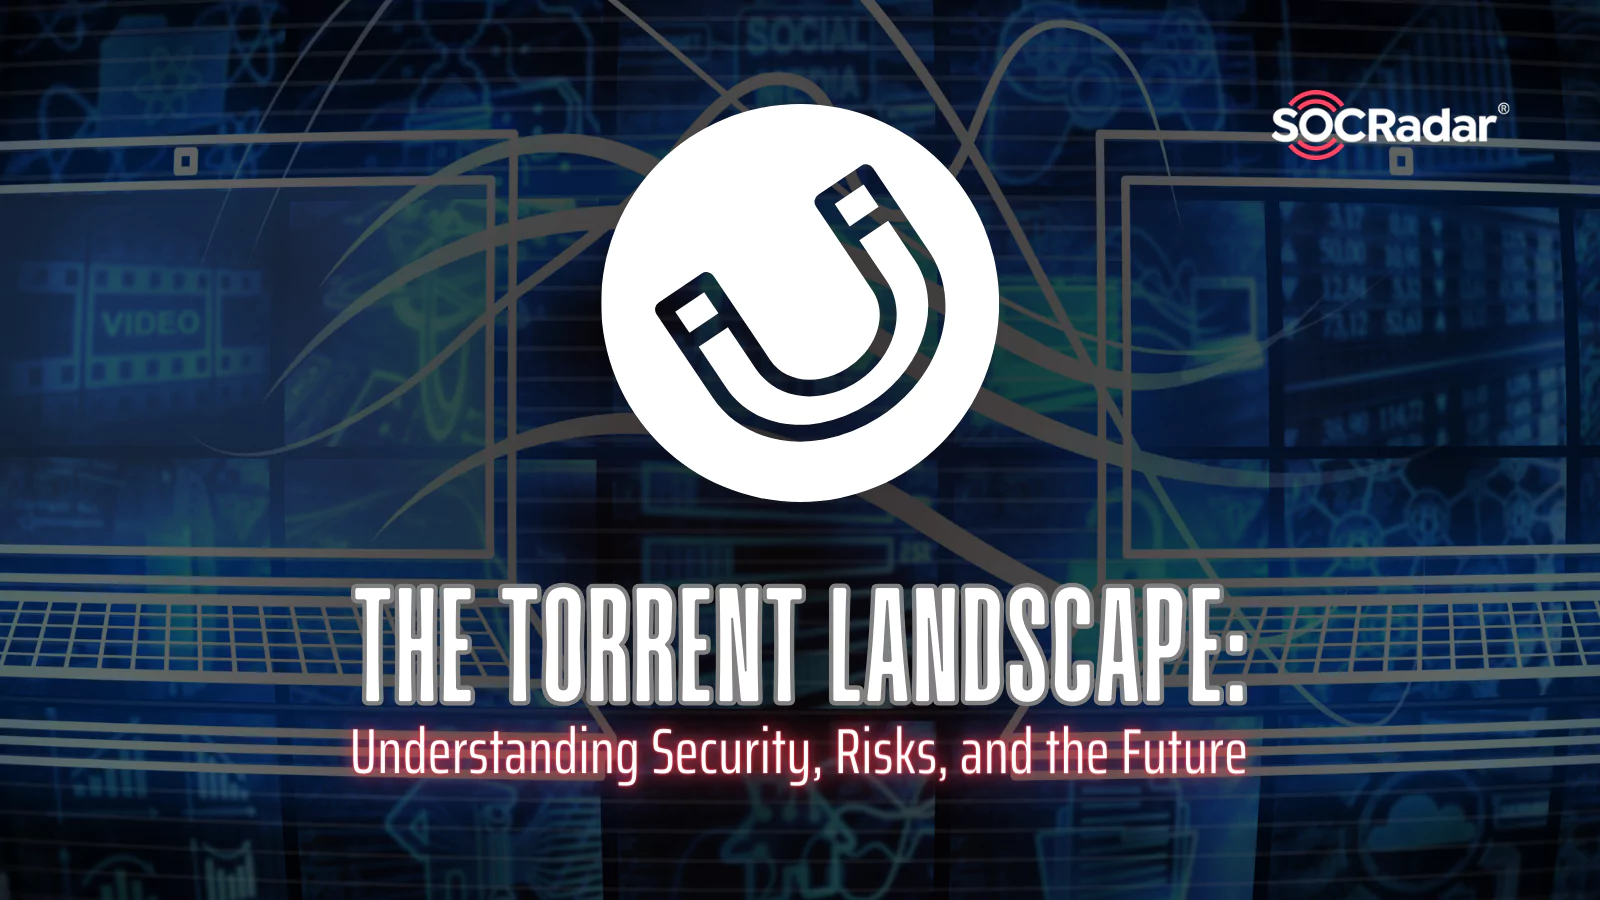 SOCRadar® Cyber Intelligence Inc. | The Torrent Landscape: Understanding Security, Risks, and the Future